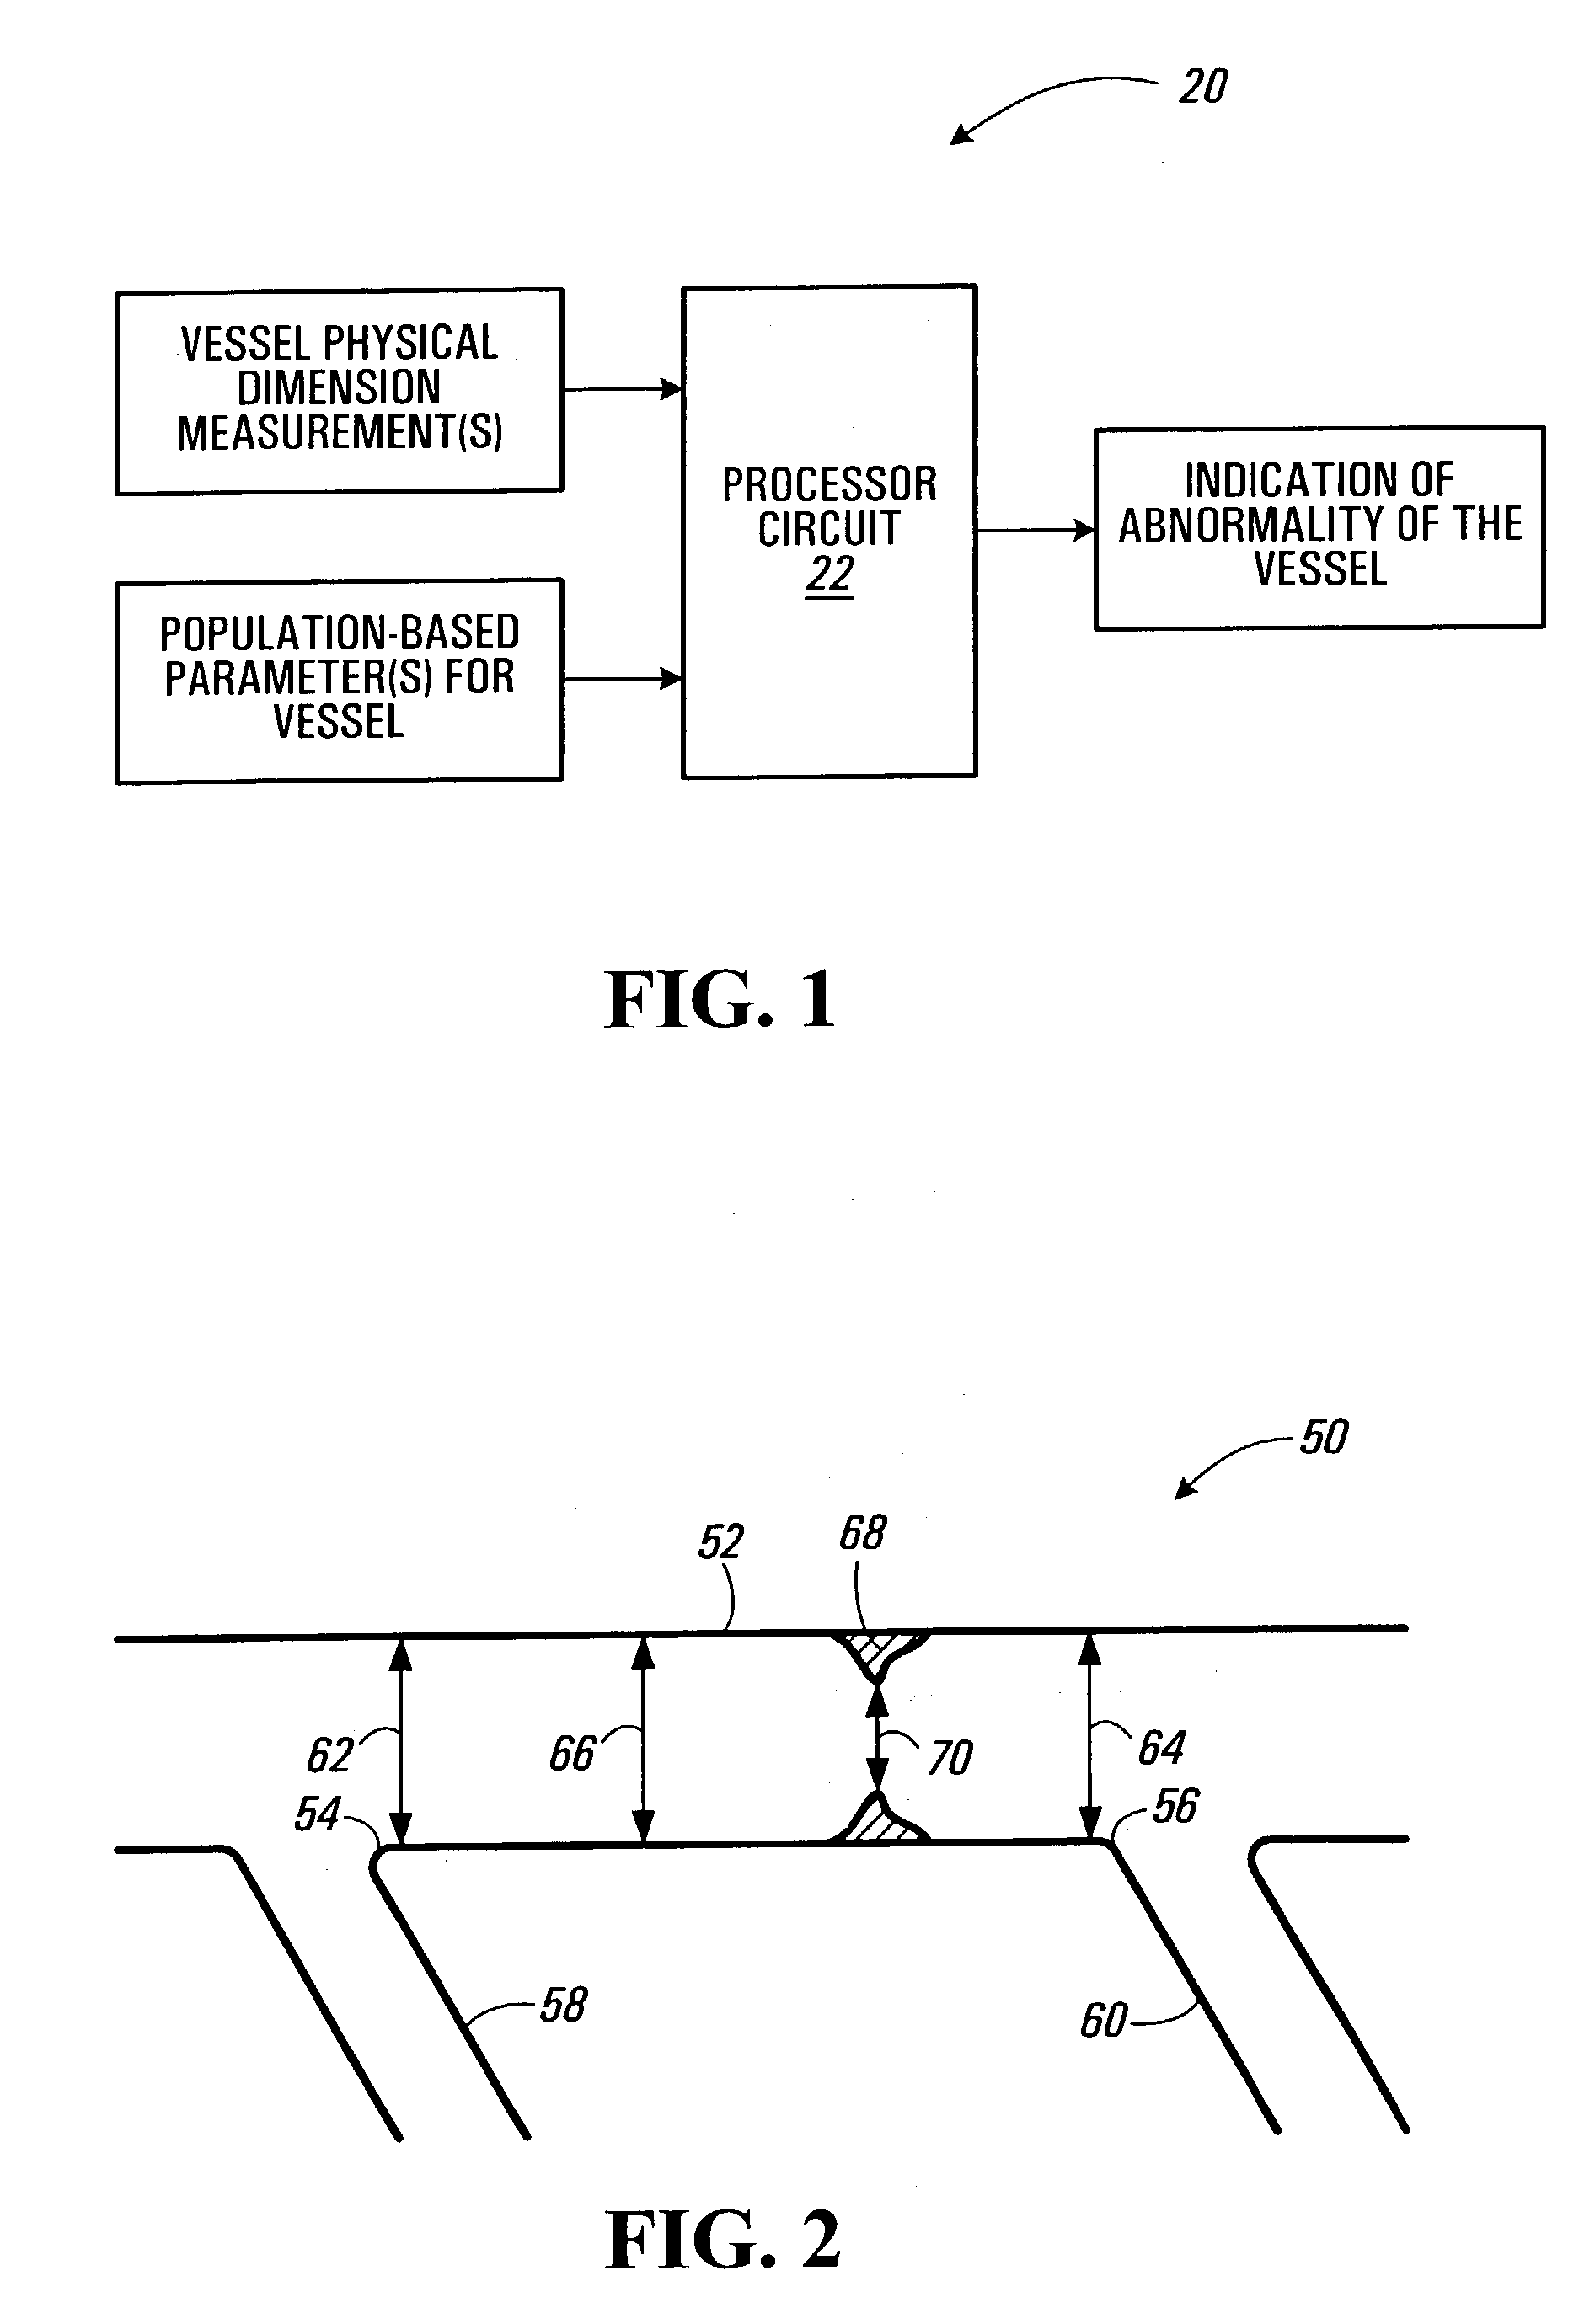 Vessel evaluation methods, apparatus, computer-readable media and signals